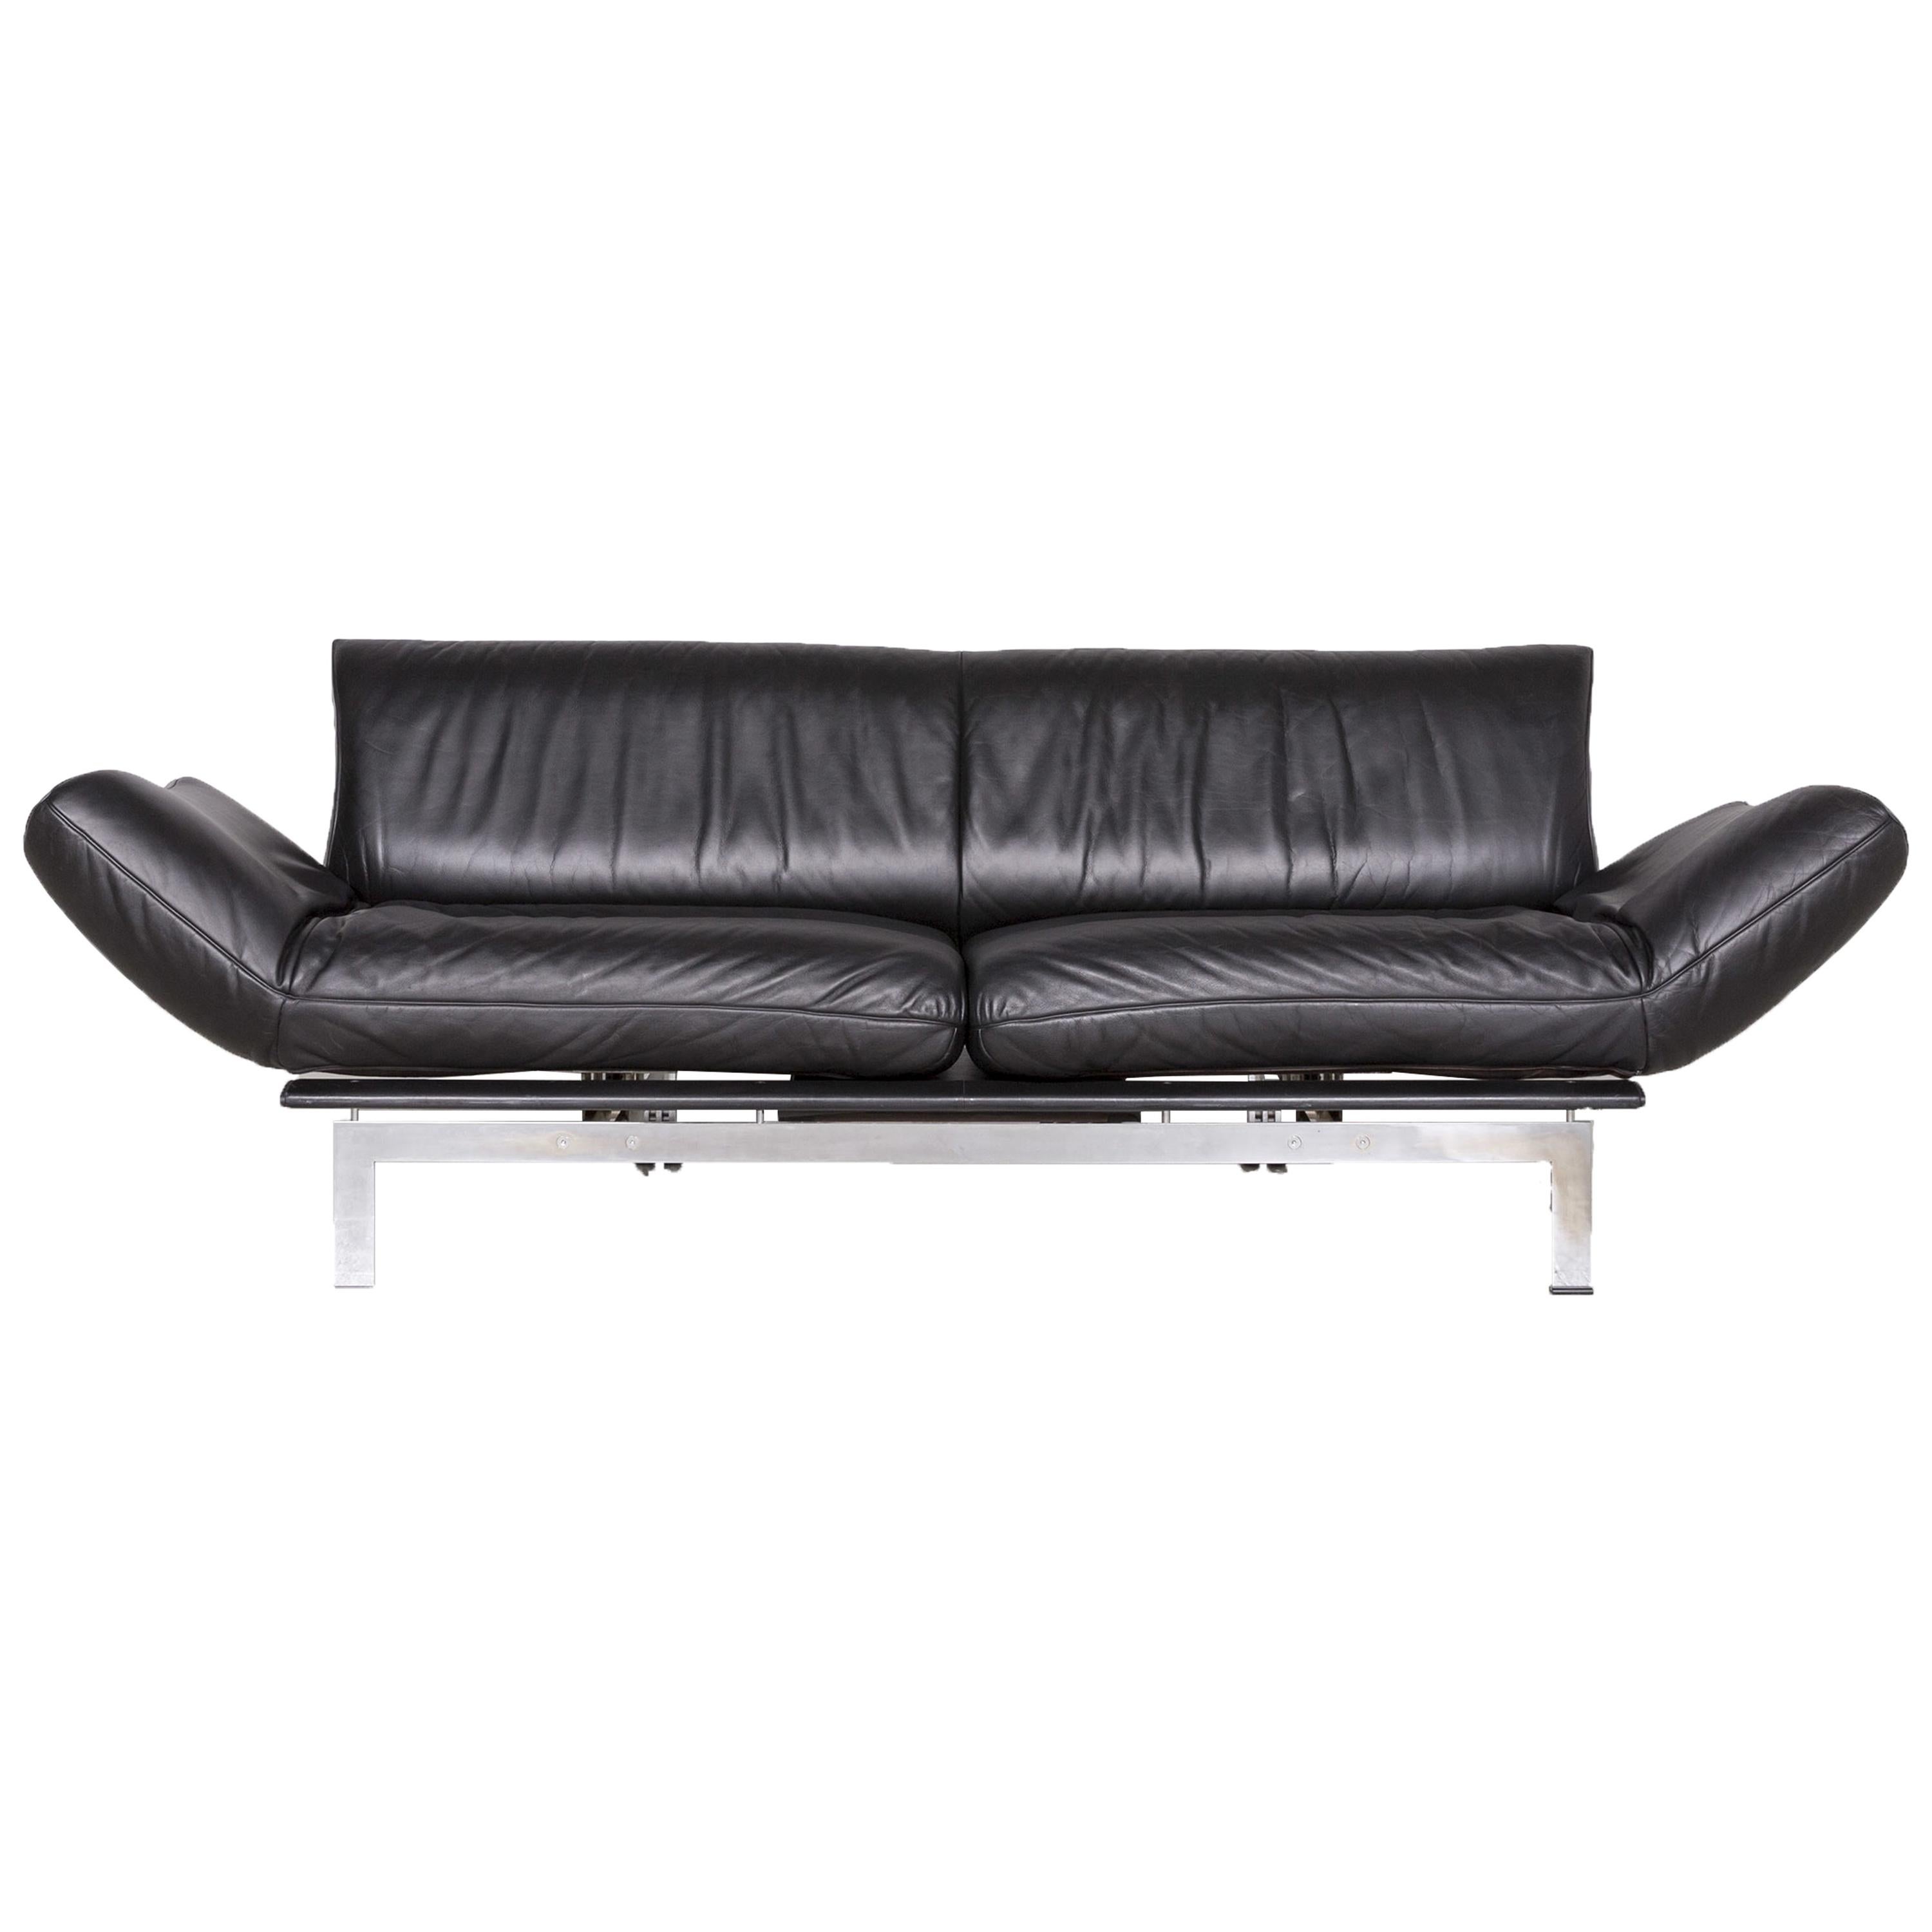 Reto Frigg DS140 Two Seater Leather Modular Sofa for De Sede, Switzerland 1985